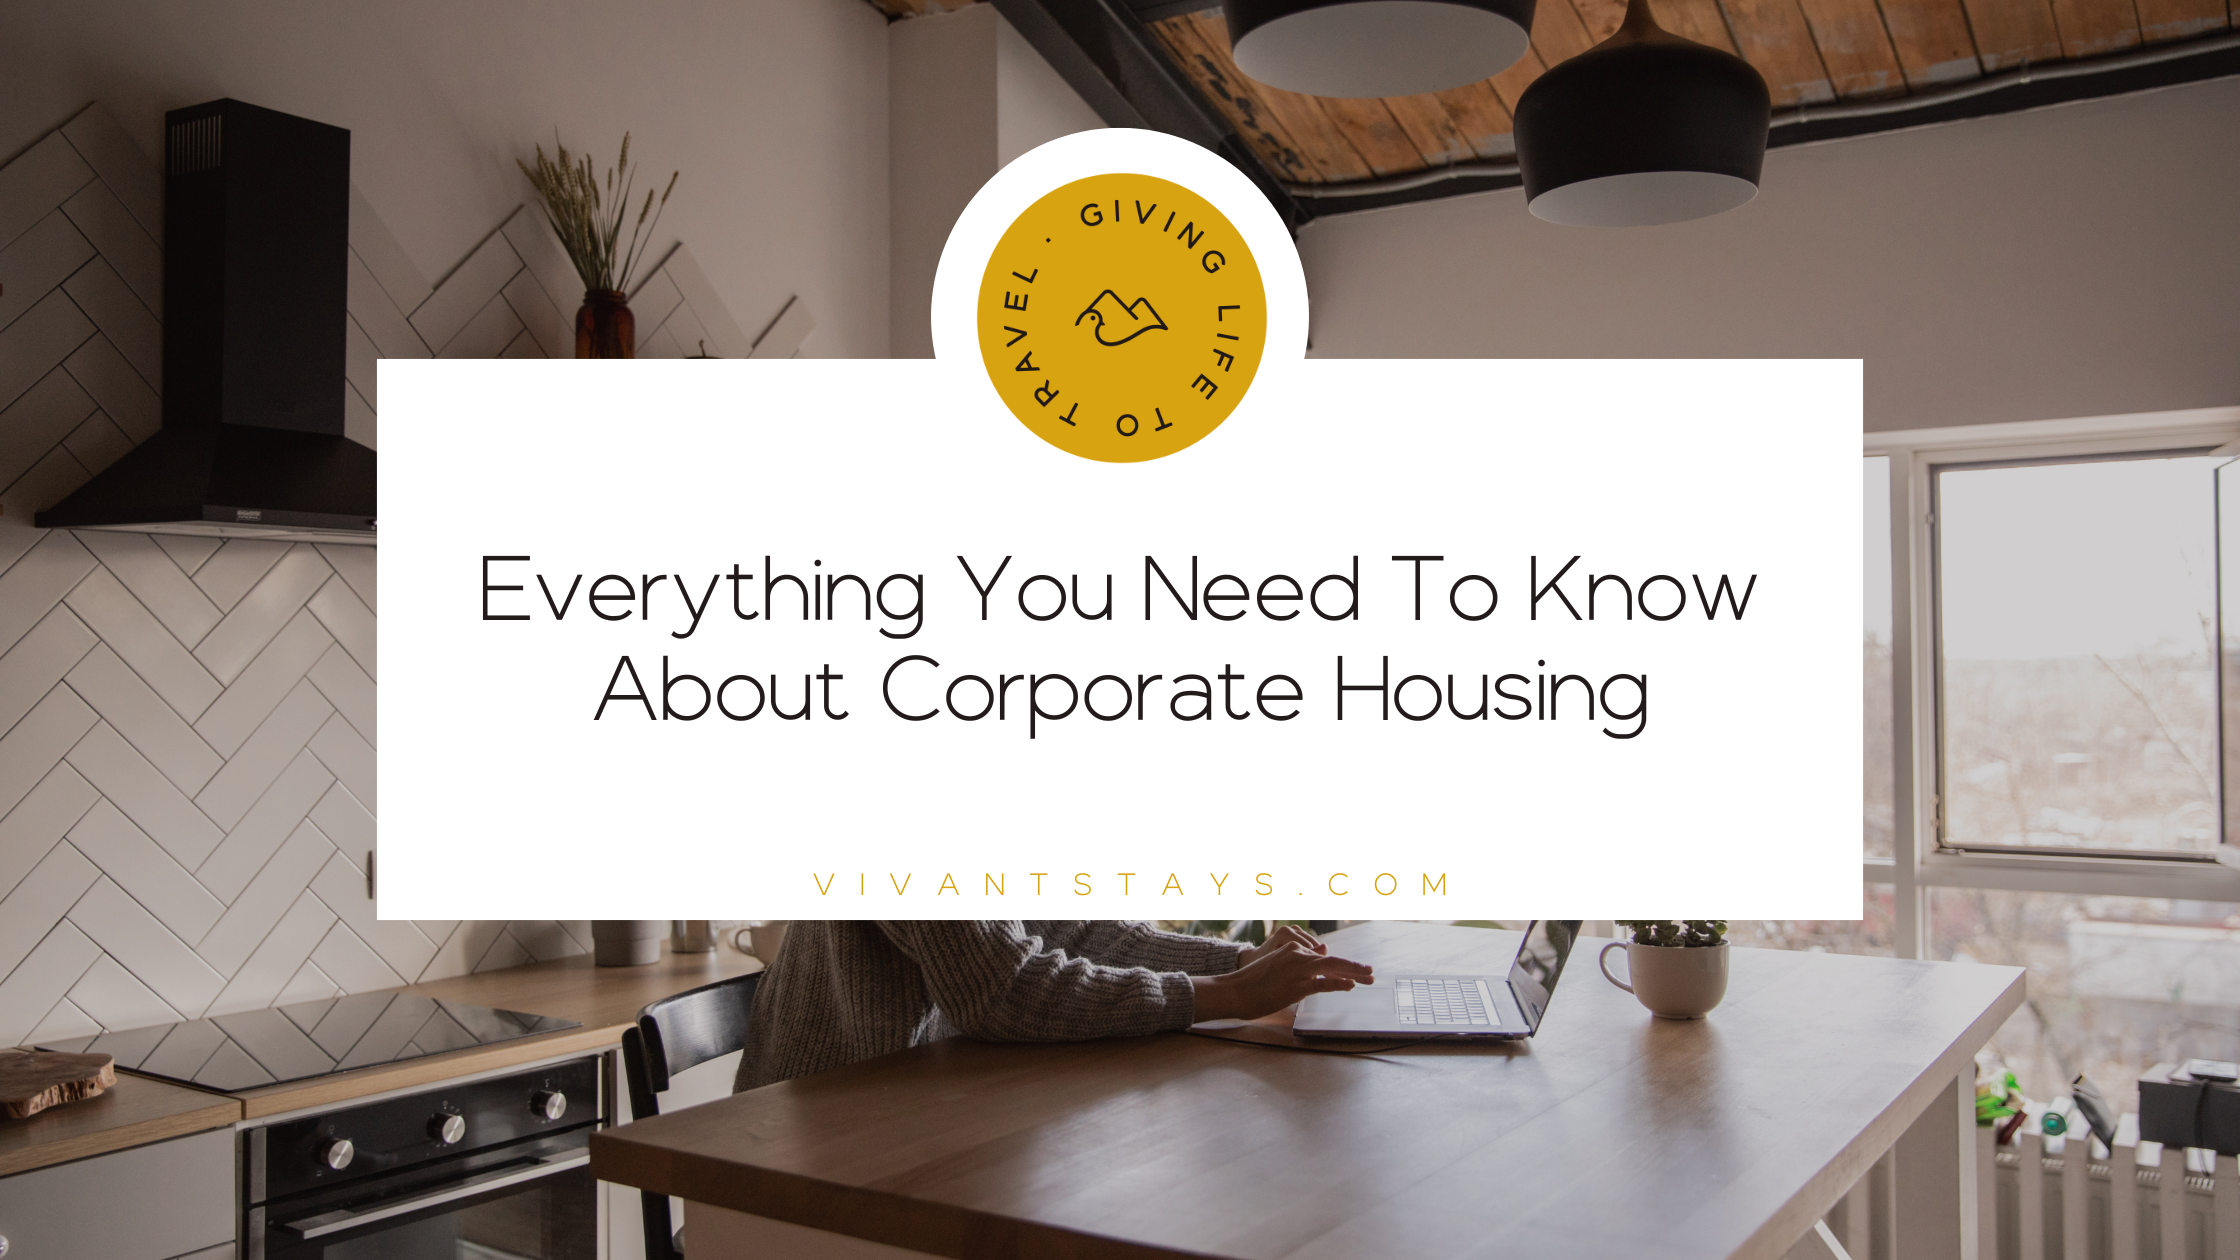 Vivant blog banner titled "Everything You Need To Know About Corporate Housing"